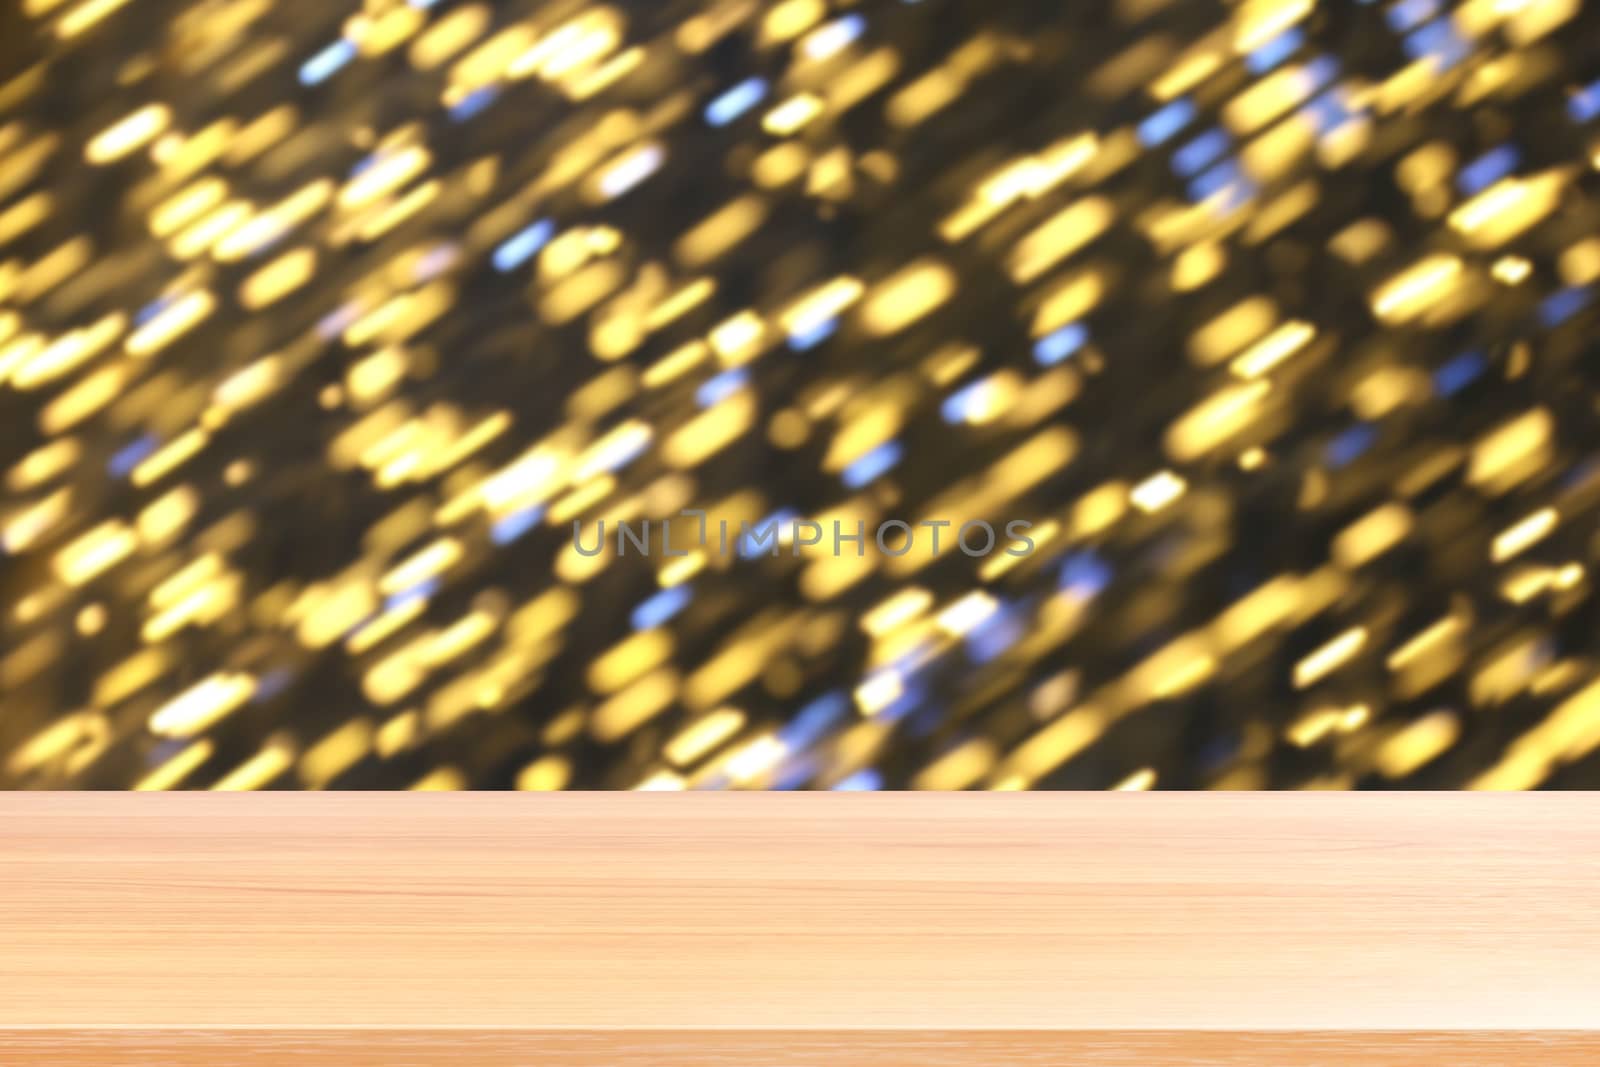 wood plank on gold colorful bokeh beam light abstract background, empty wood table floors on golden bokeh night light multi color background, wood table board empty front colorful bokeh gold light by cgdeaw